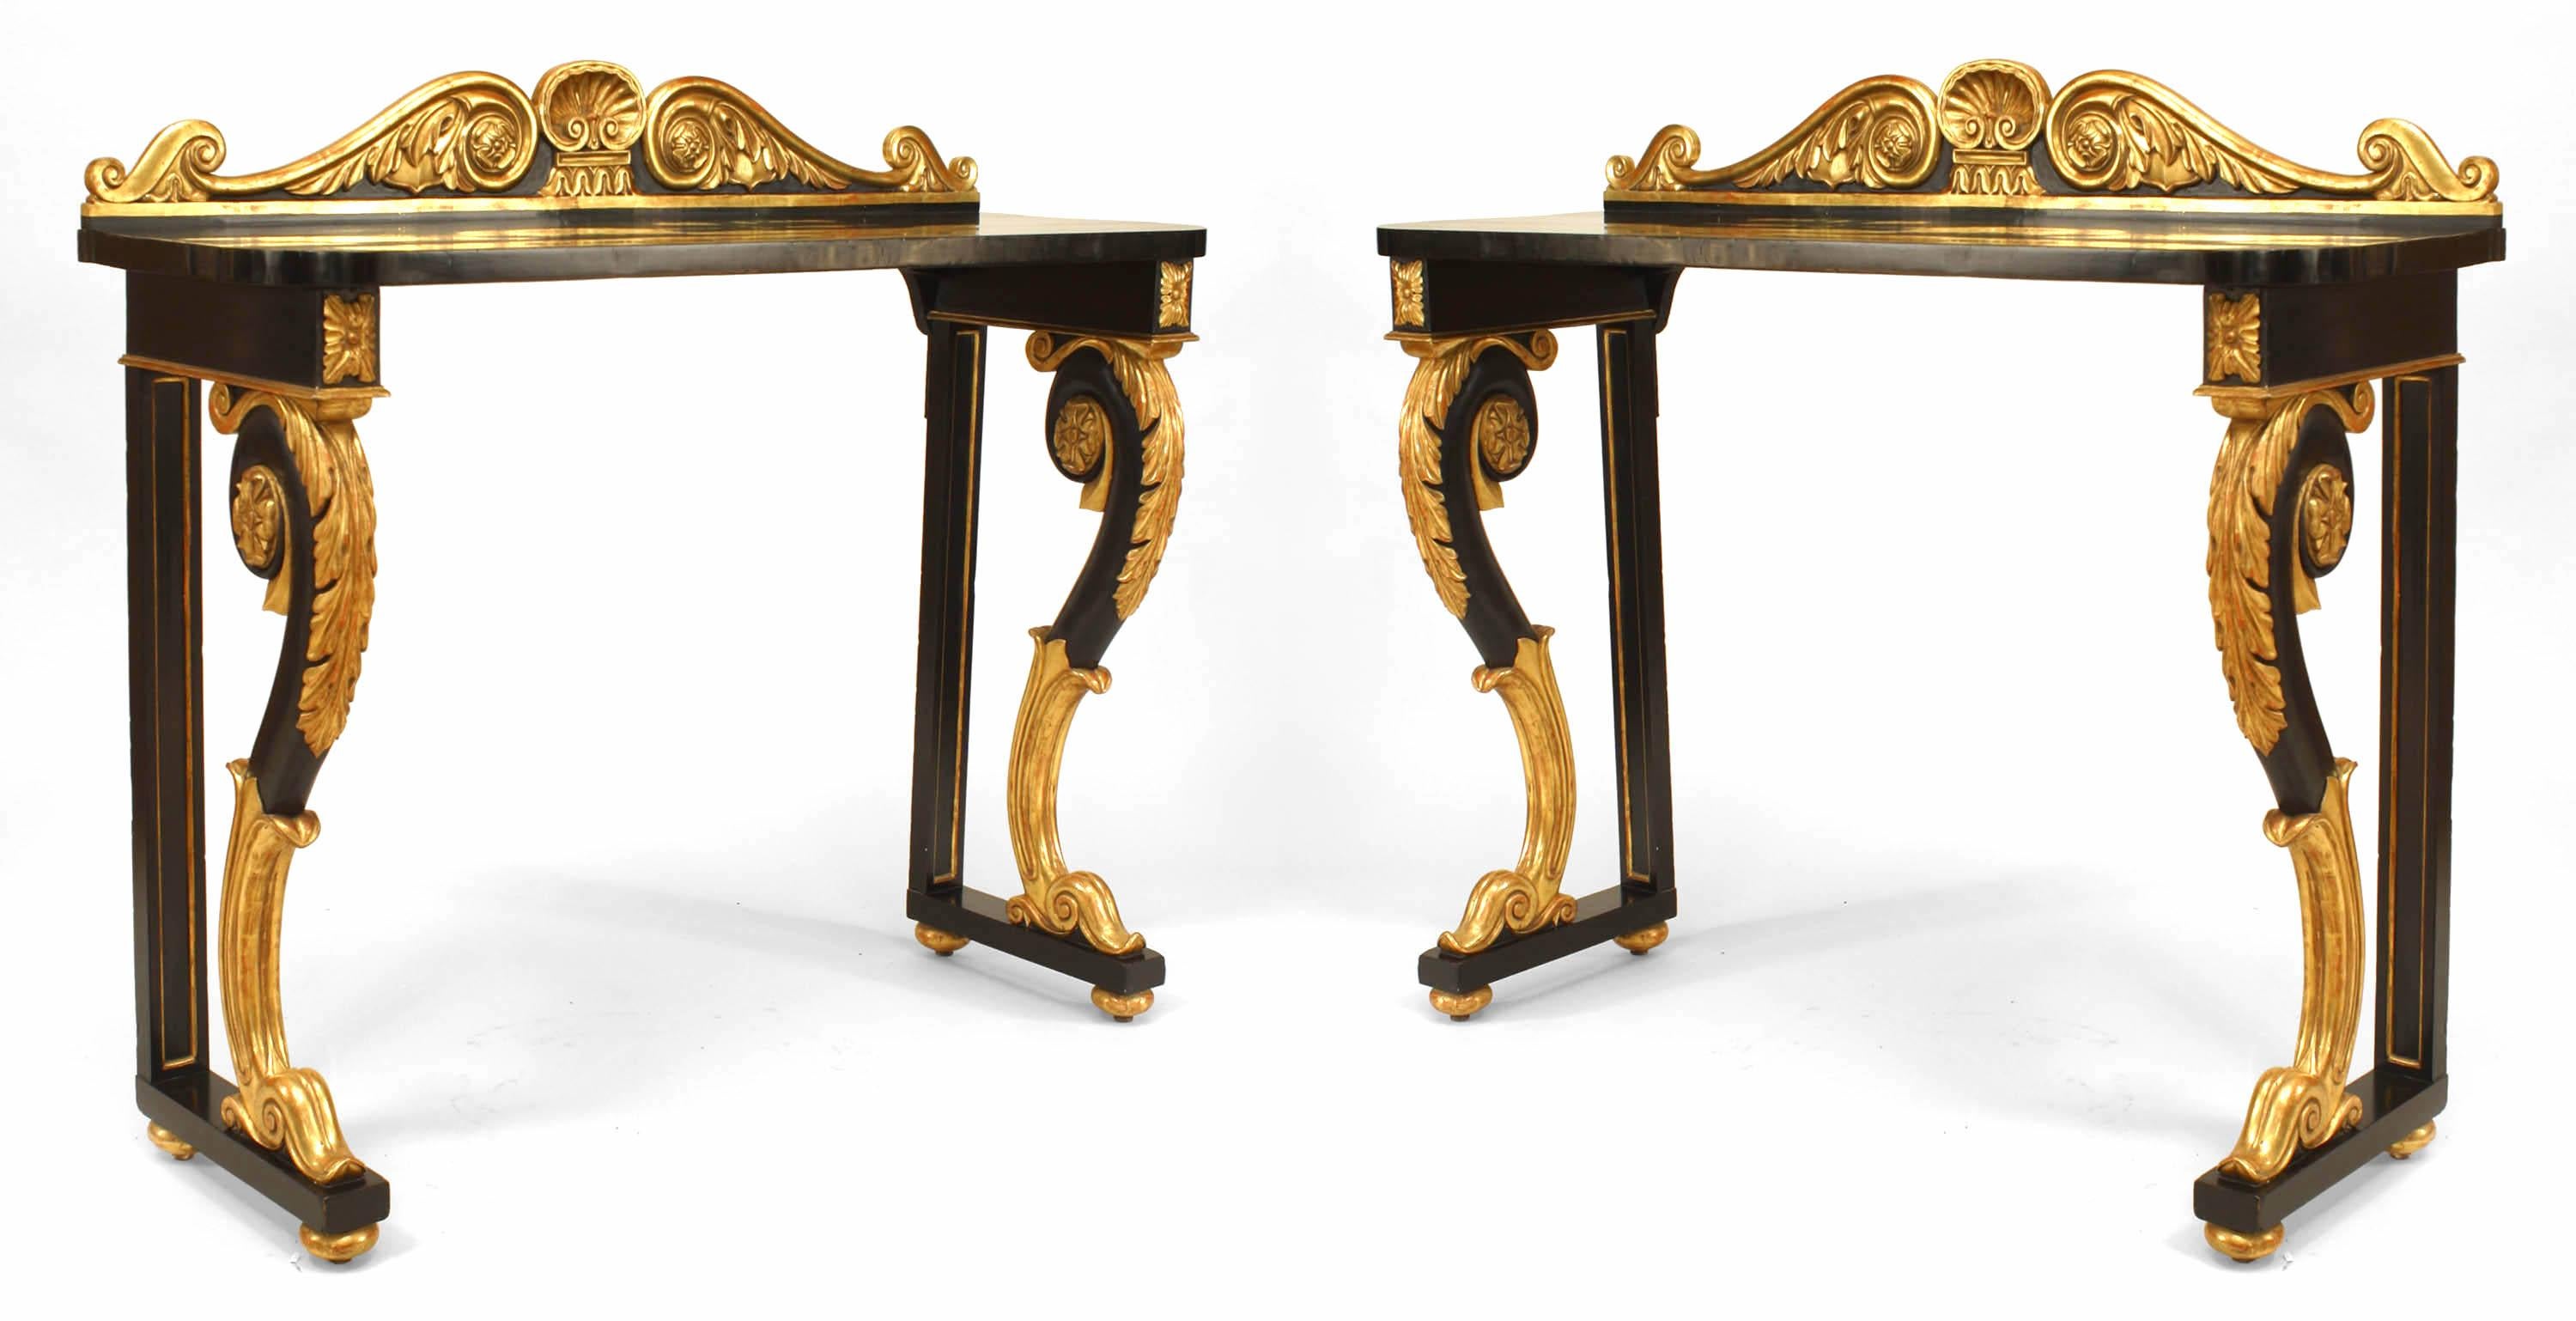 Pair of English Regency-style (19th Century) ebonized and gilt trimmed scroll leg console tables with carved back rail.
